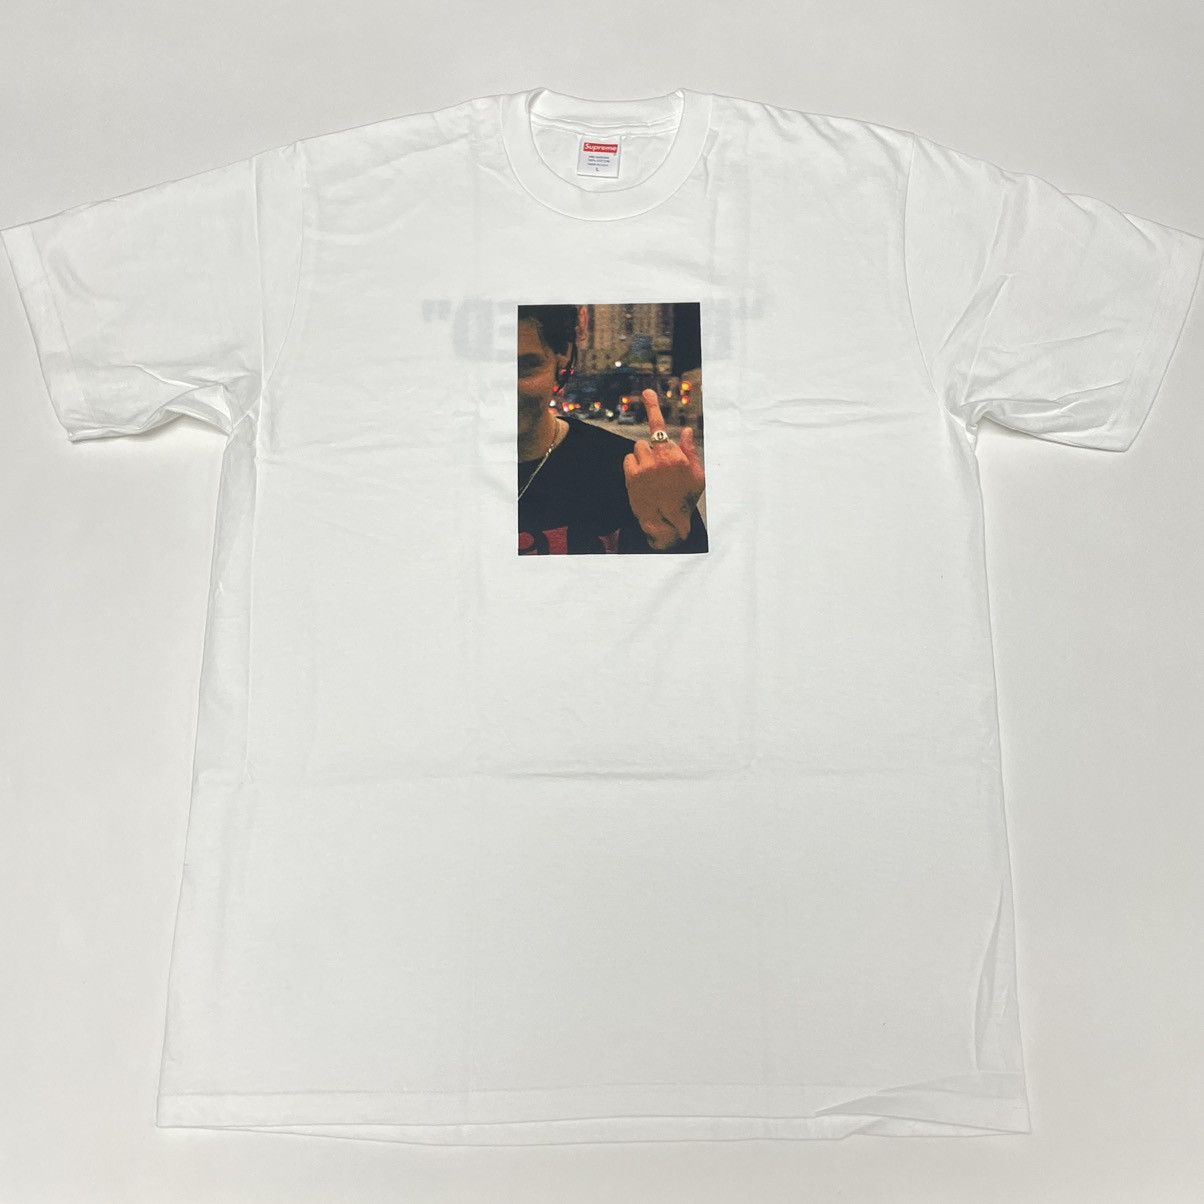 Supreme Blessed Supreme Tee XL | Grailed